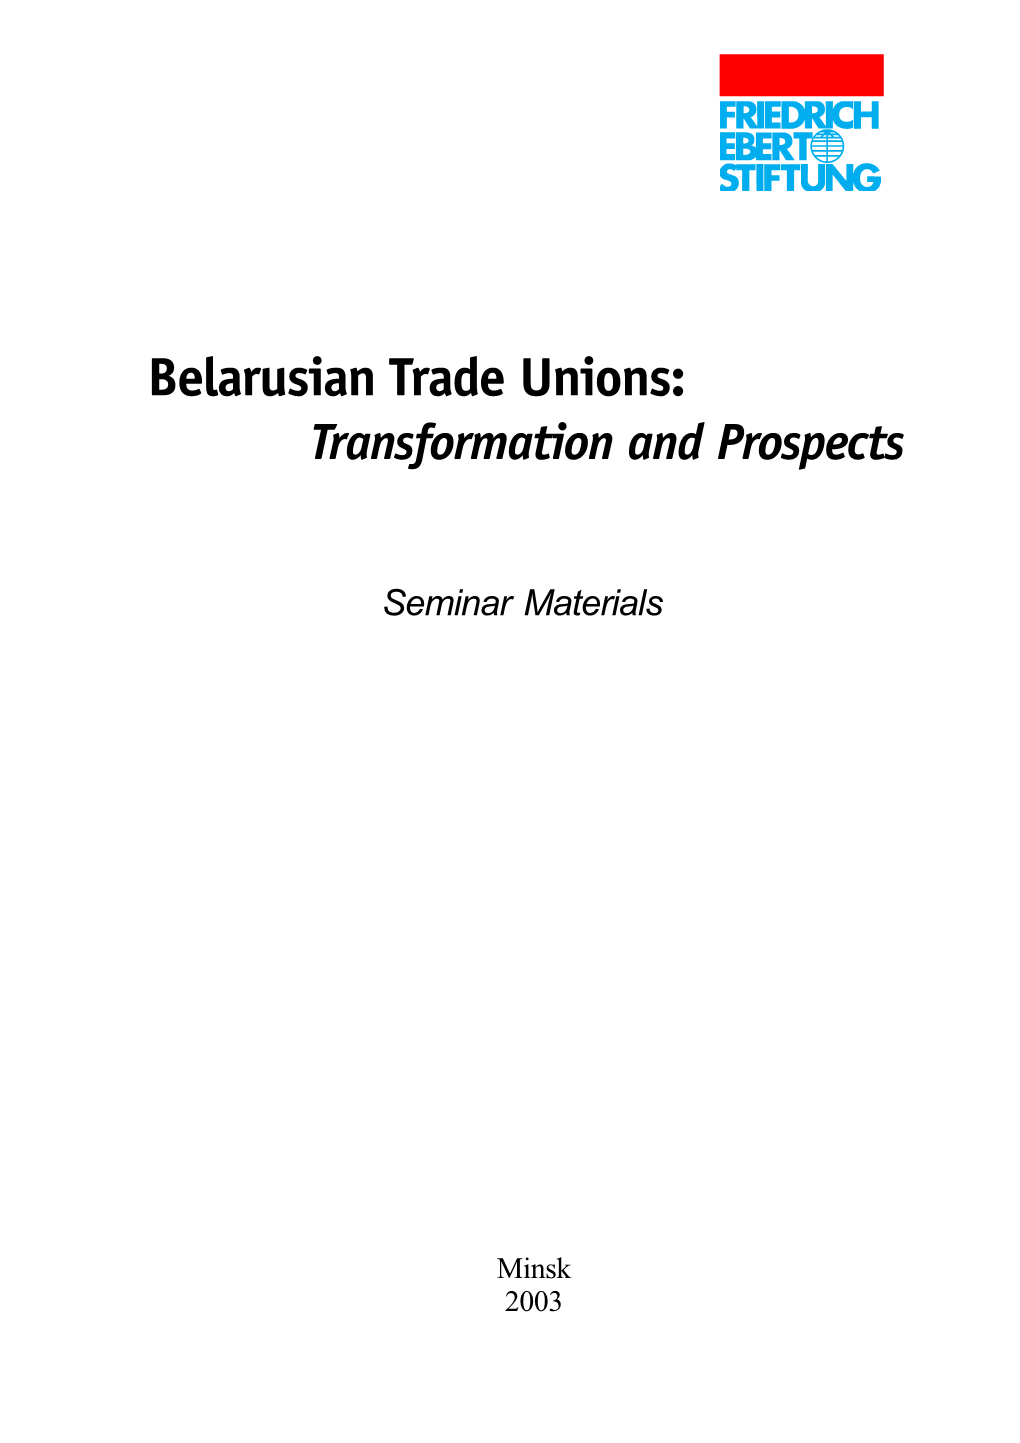 Trade Unions: Transformation and Prospects